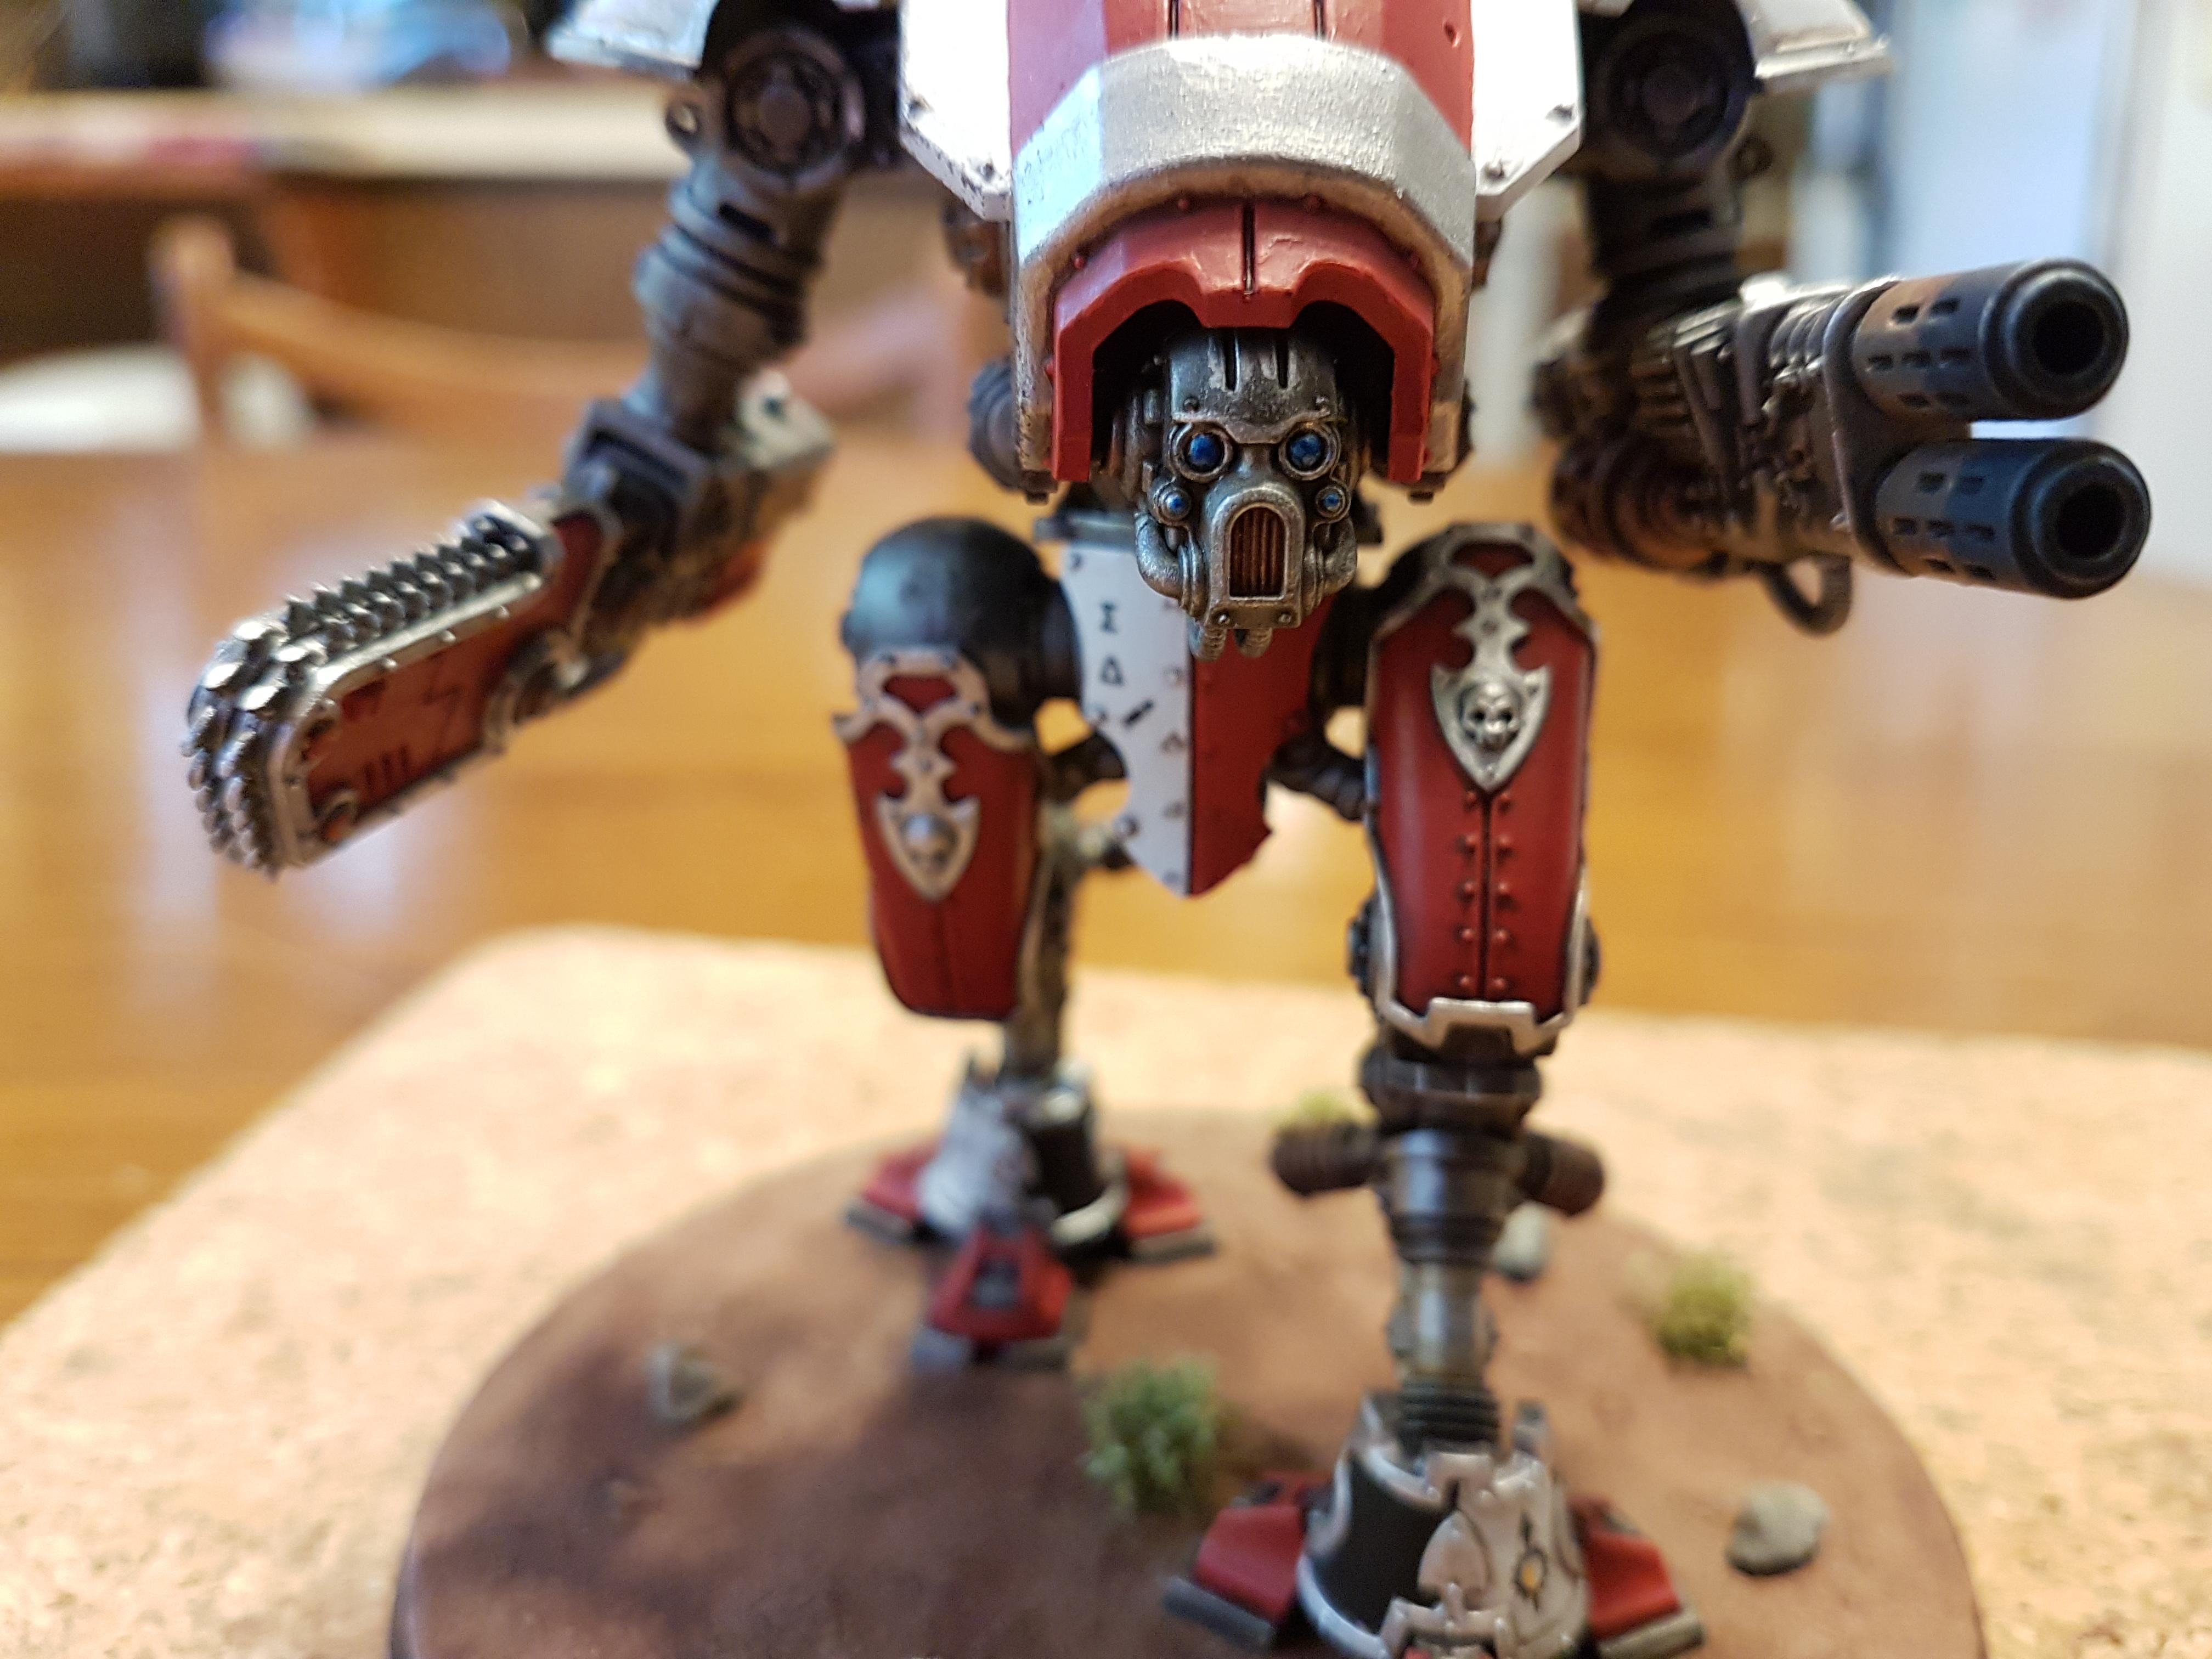 Armiger, Armiger Warglaives, Black, House Taranis, Imperial, Imperial Knights, Knights, Reaper Chain-cleaver, Red, Taranis, Thermal Spear, Warglaives, White